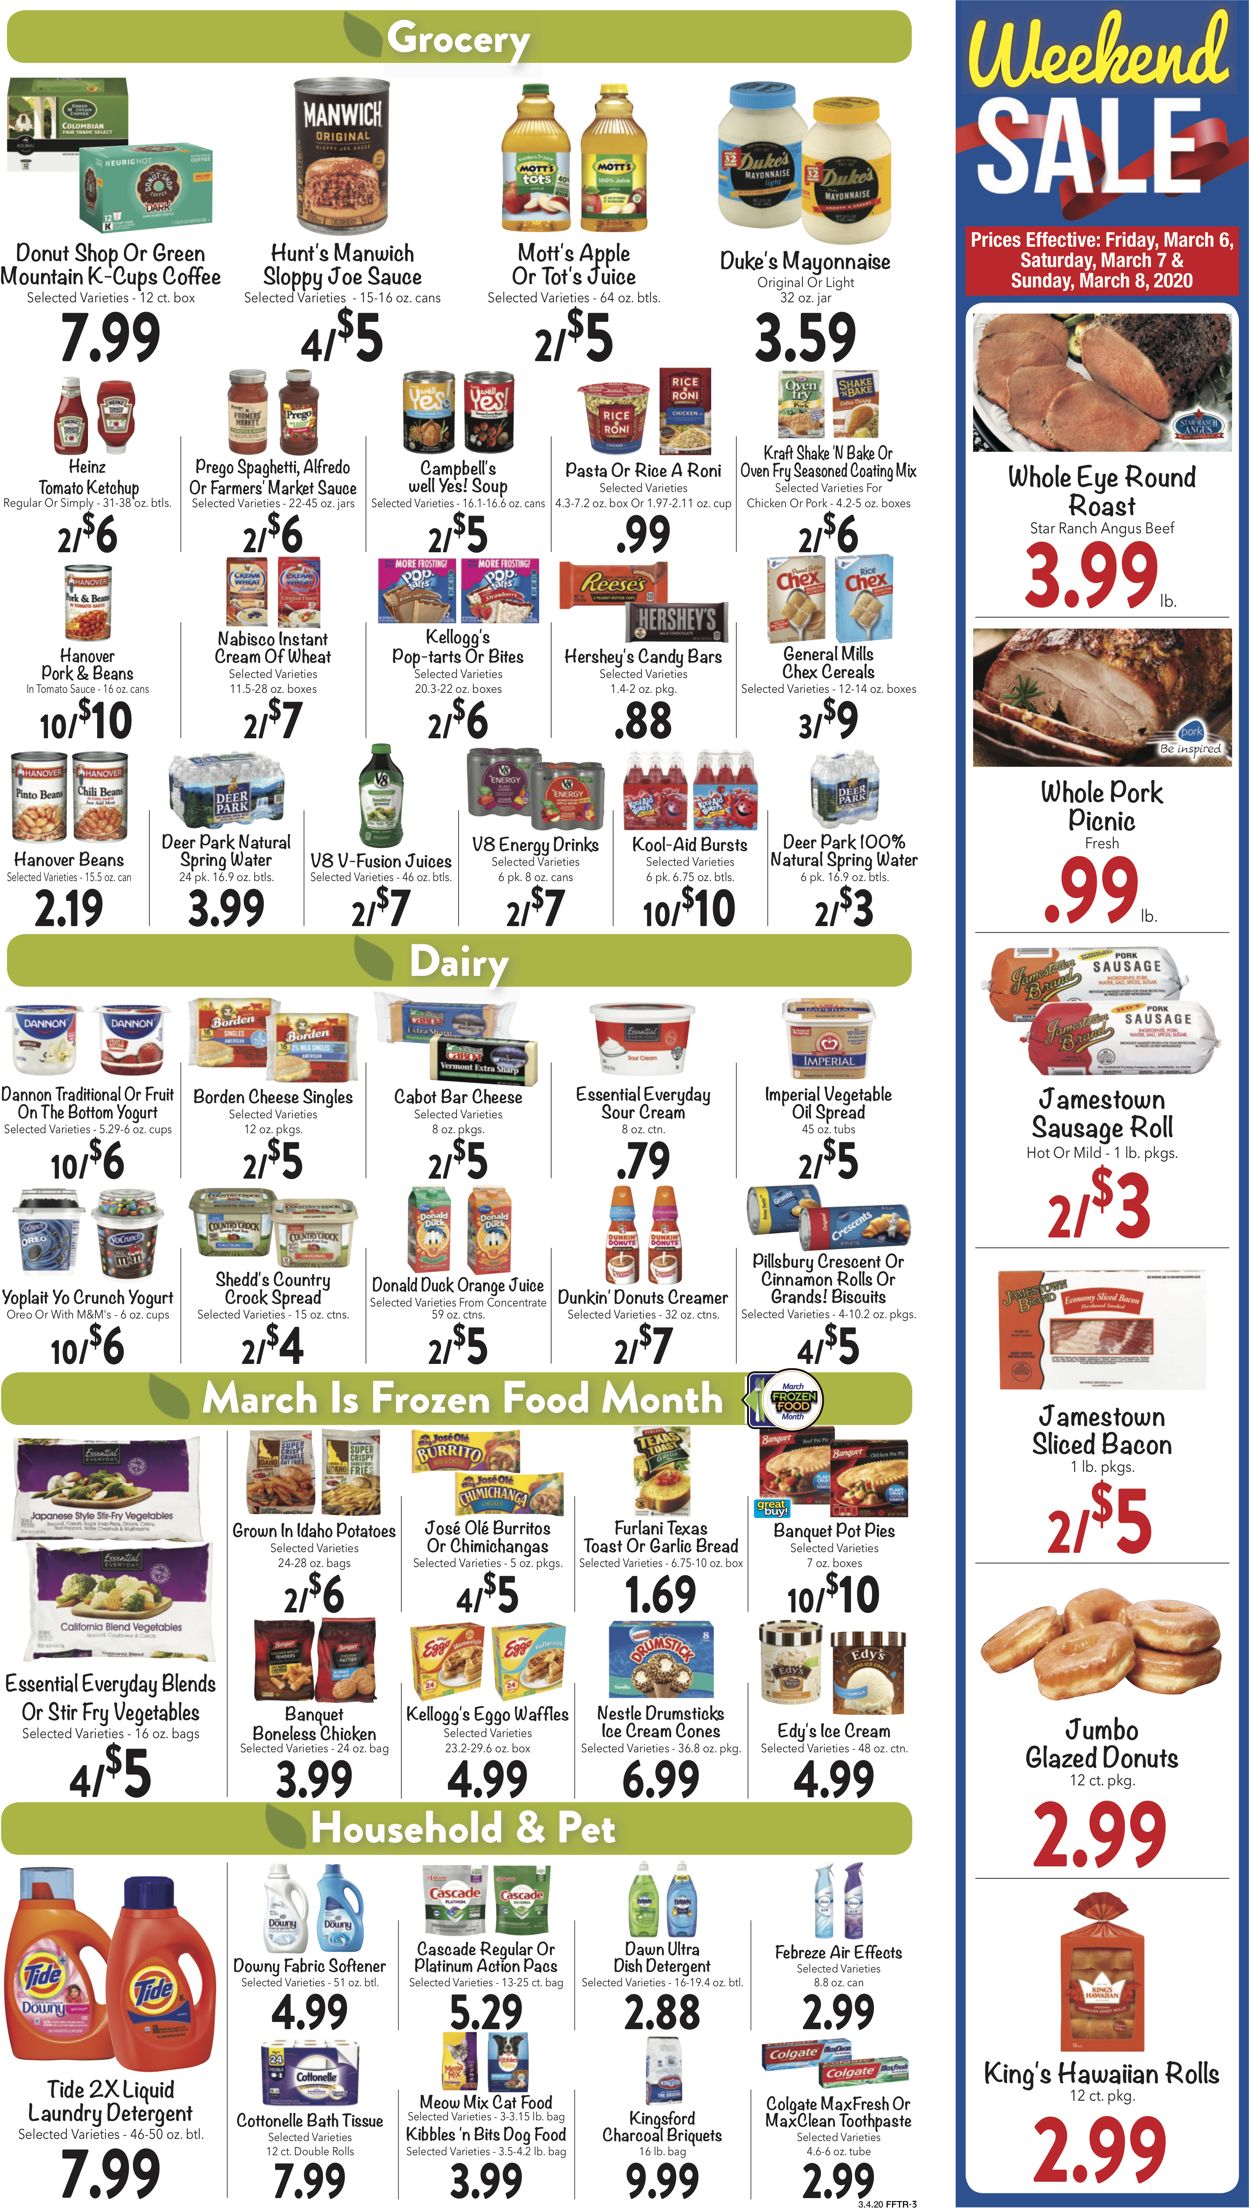 Farm Fresh Current weekly ad 03/04 - 03/10/2020 - frequent-ads.com